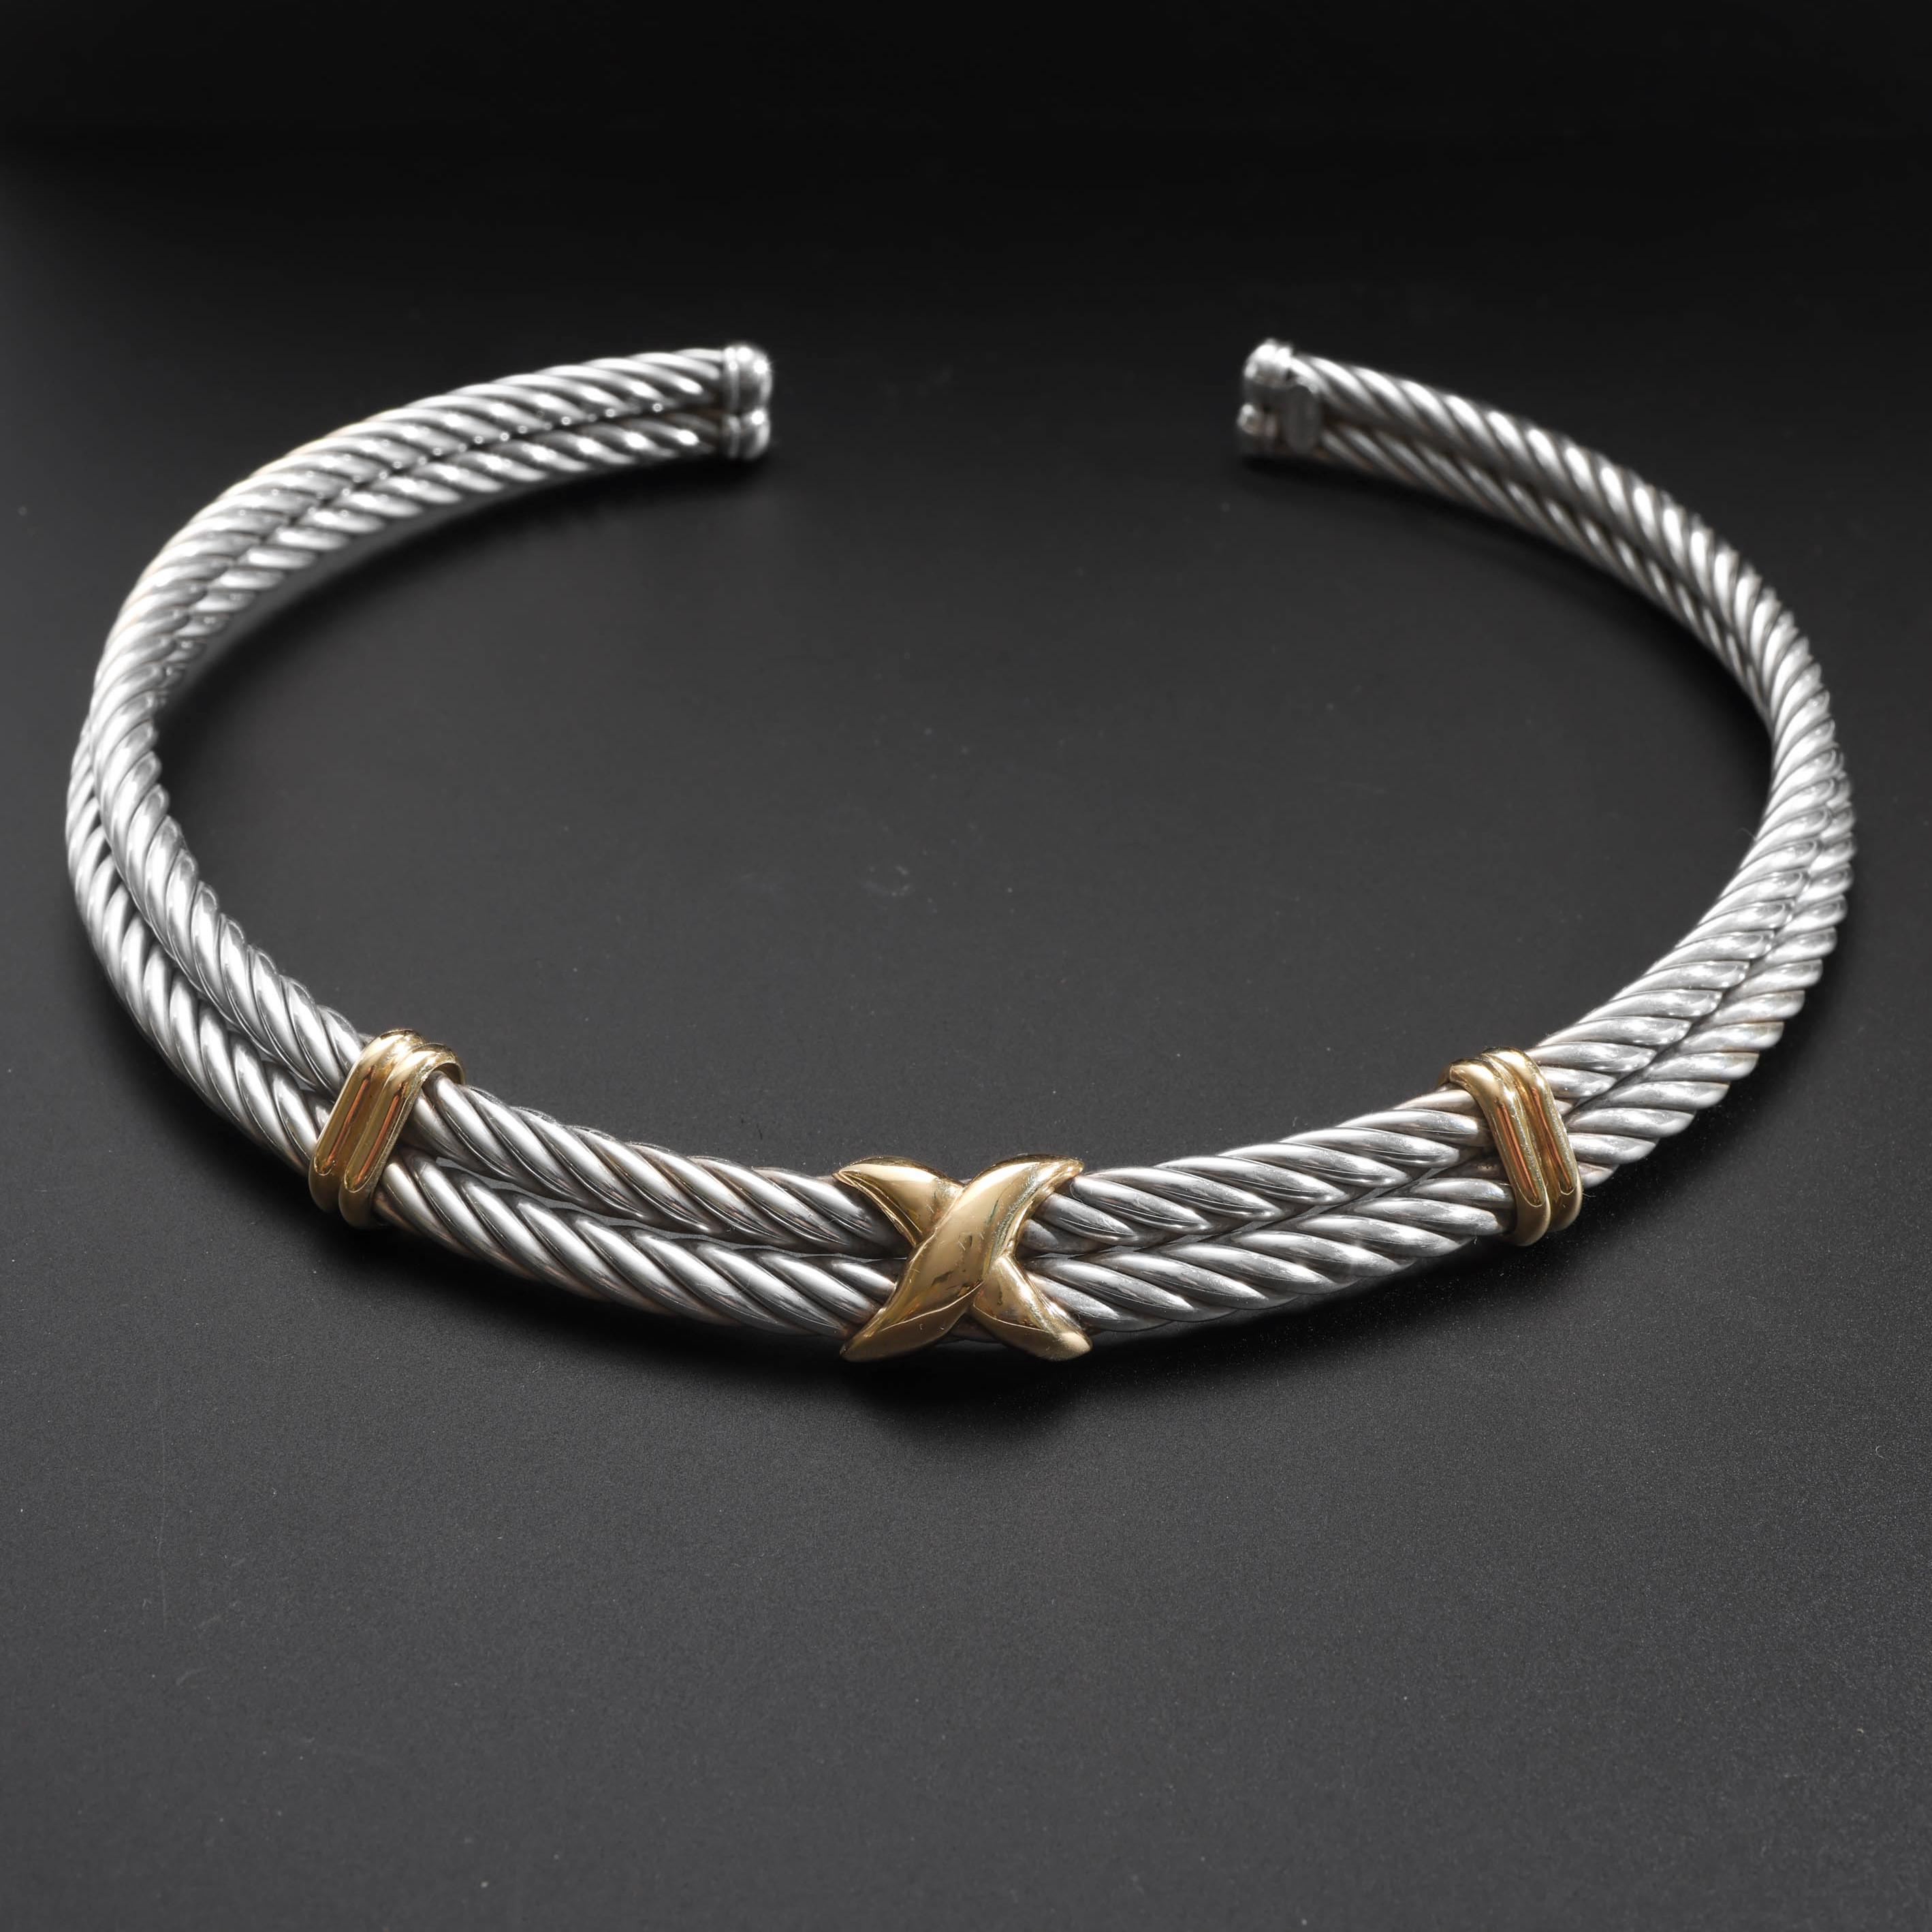 This bold solid sterling silver and 18K yellow gold double-twist choker necklace was created by hand in Italy circa 1990s.

Composed of two 5.5mm thick 16